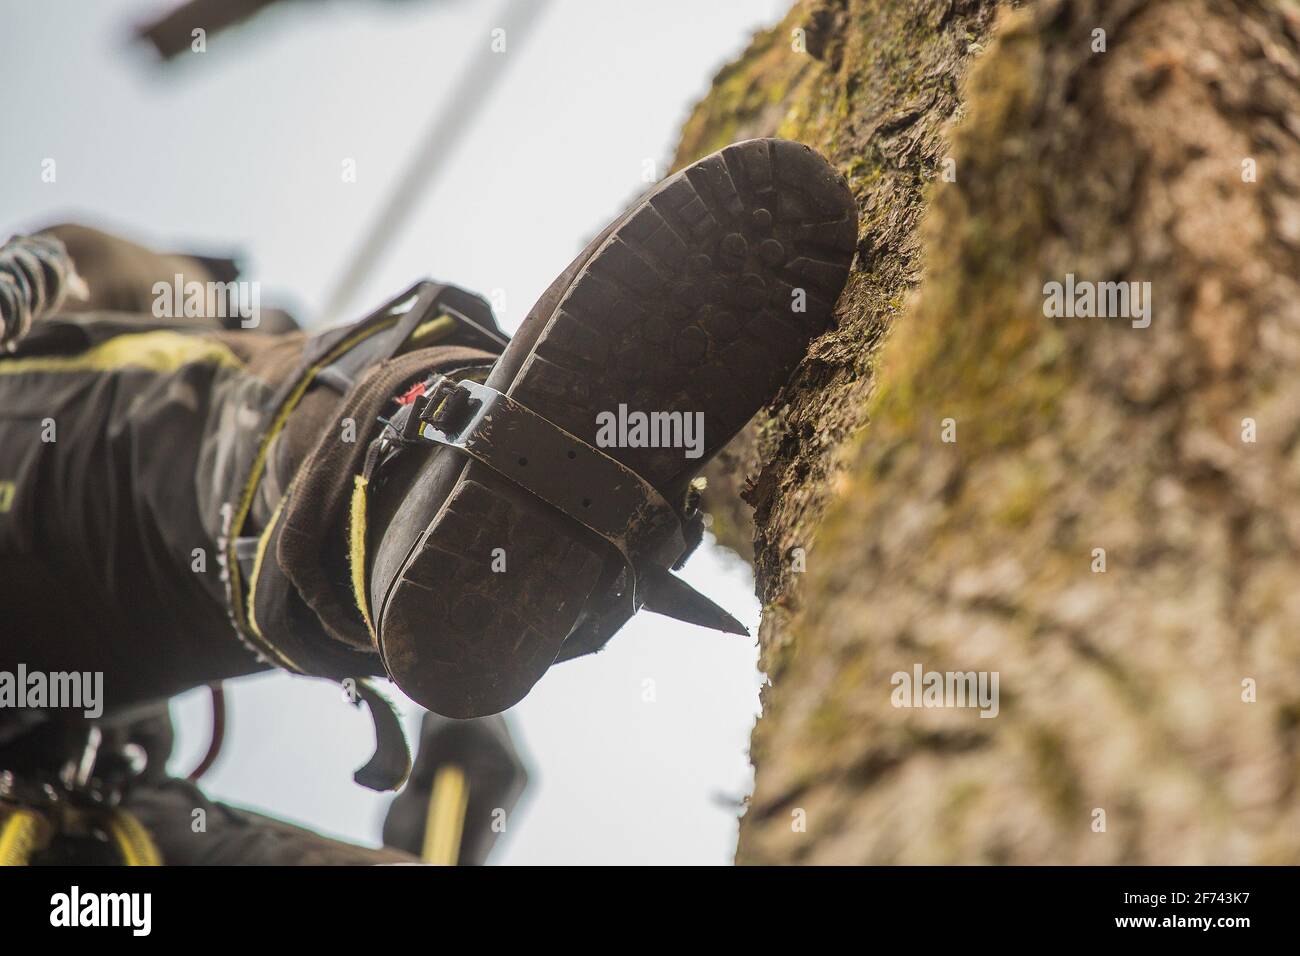 Arborist or lumberjack climbing up on a large tree using different safety and climbing tools. Arborist preparing to cut a tree, detail of a shoe Stock Photo